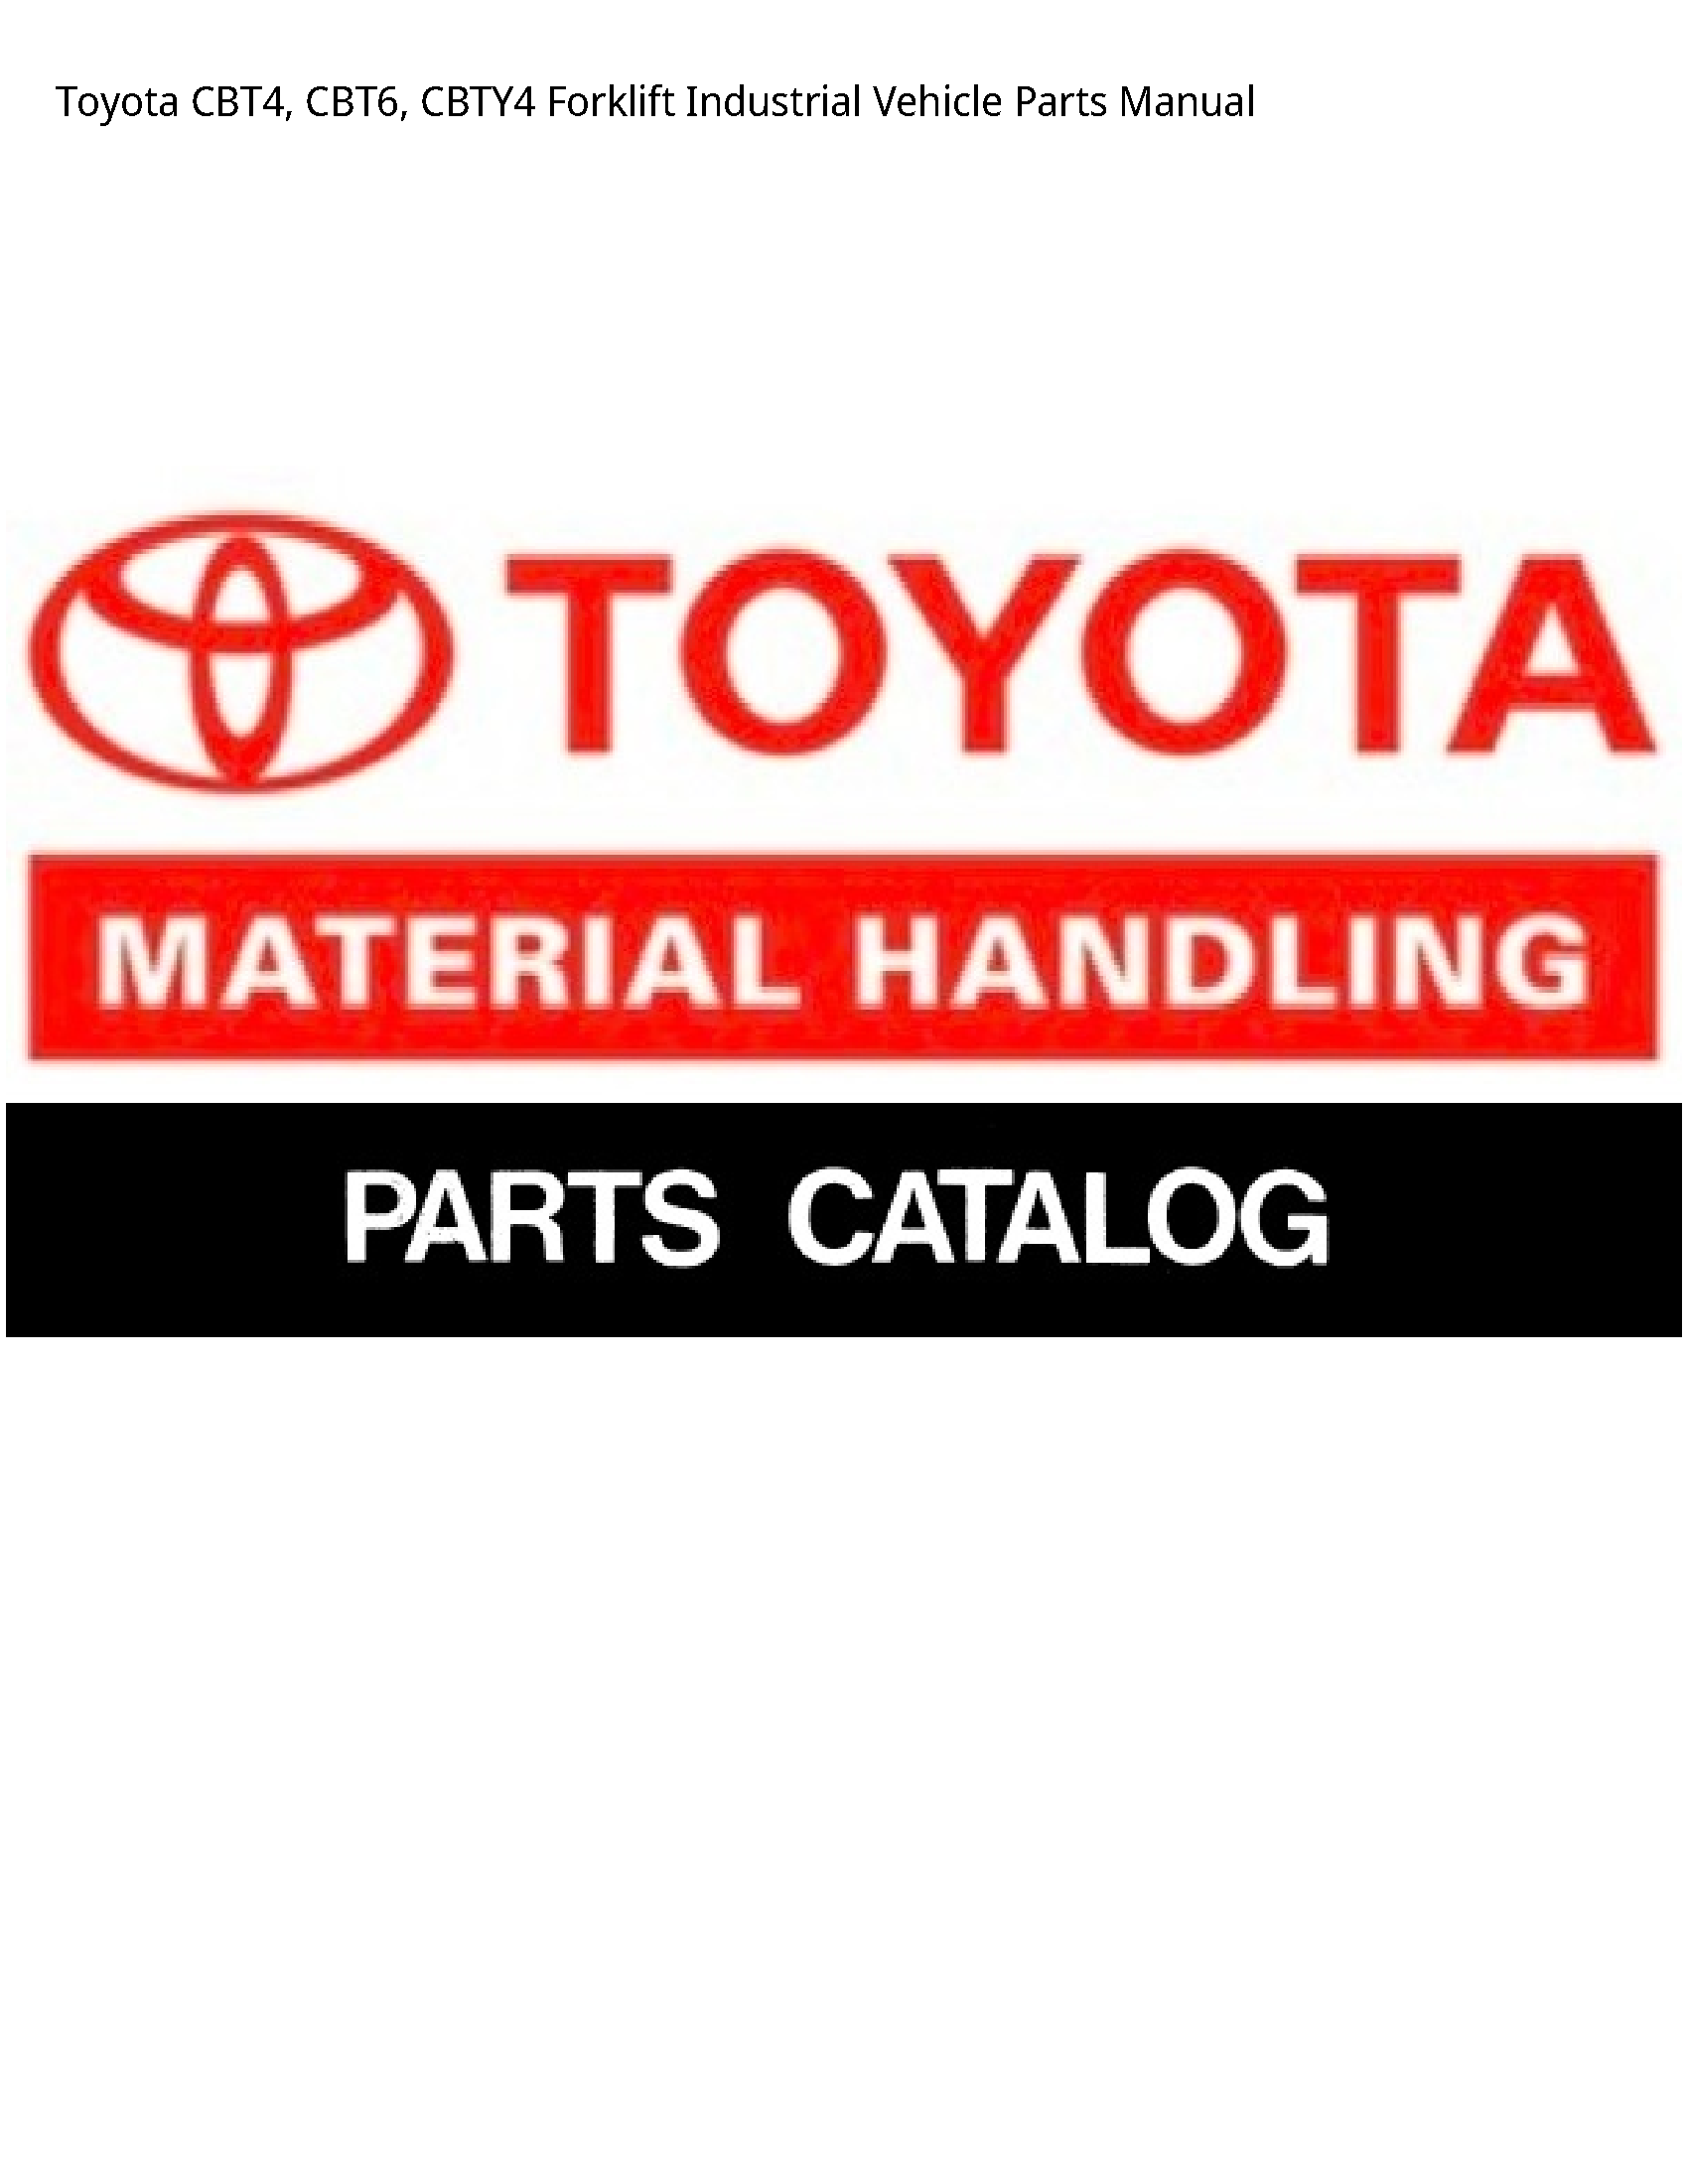 Toyota CBT4 Forklift Industrial Vehicle Parts manual